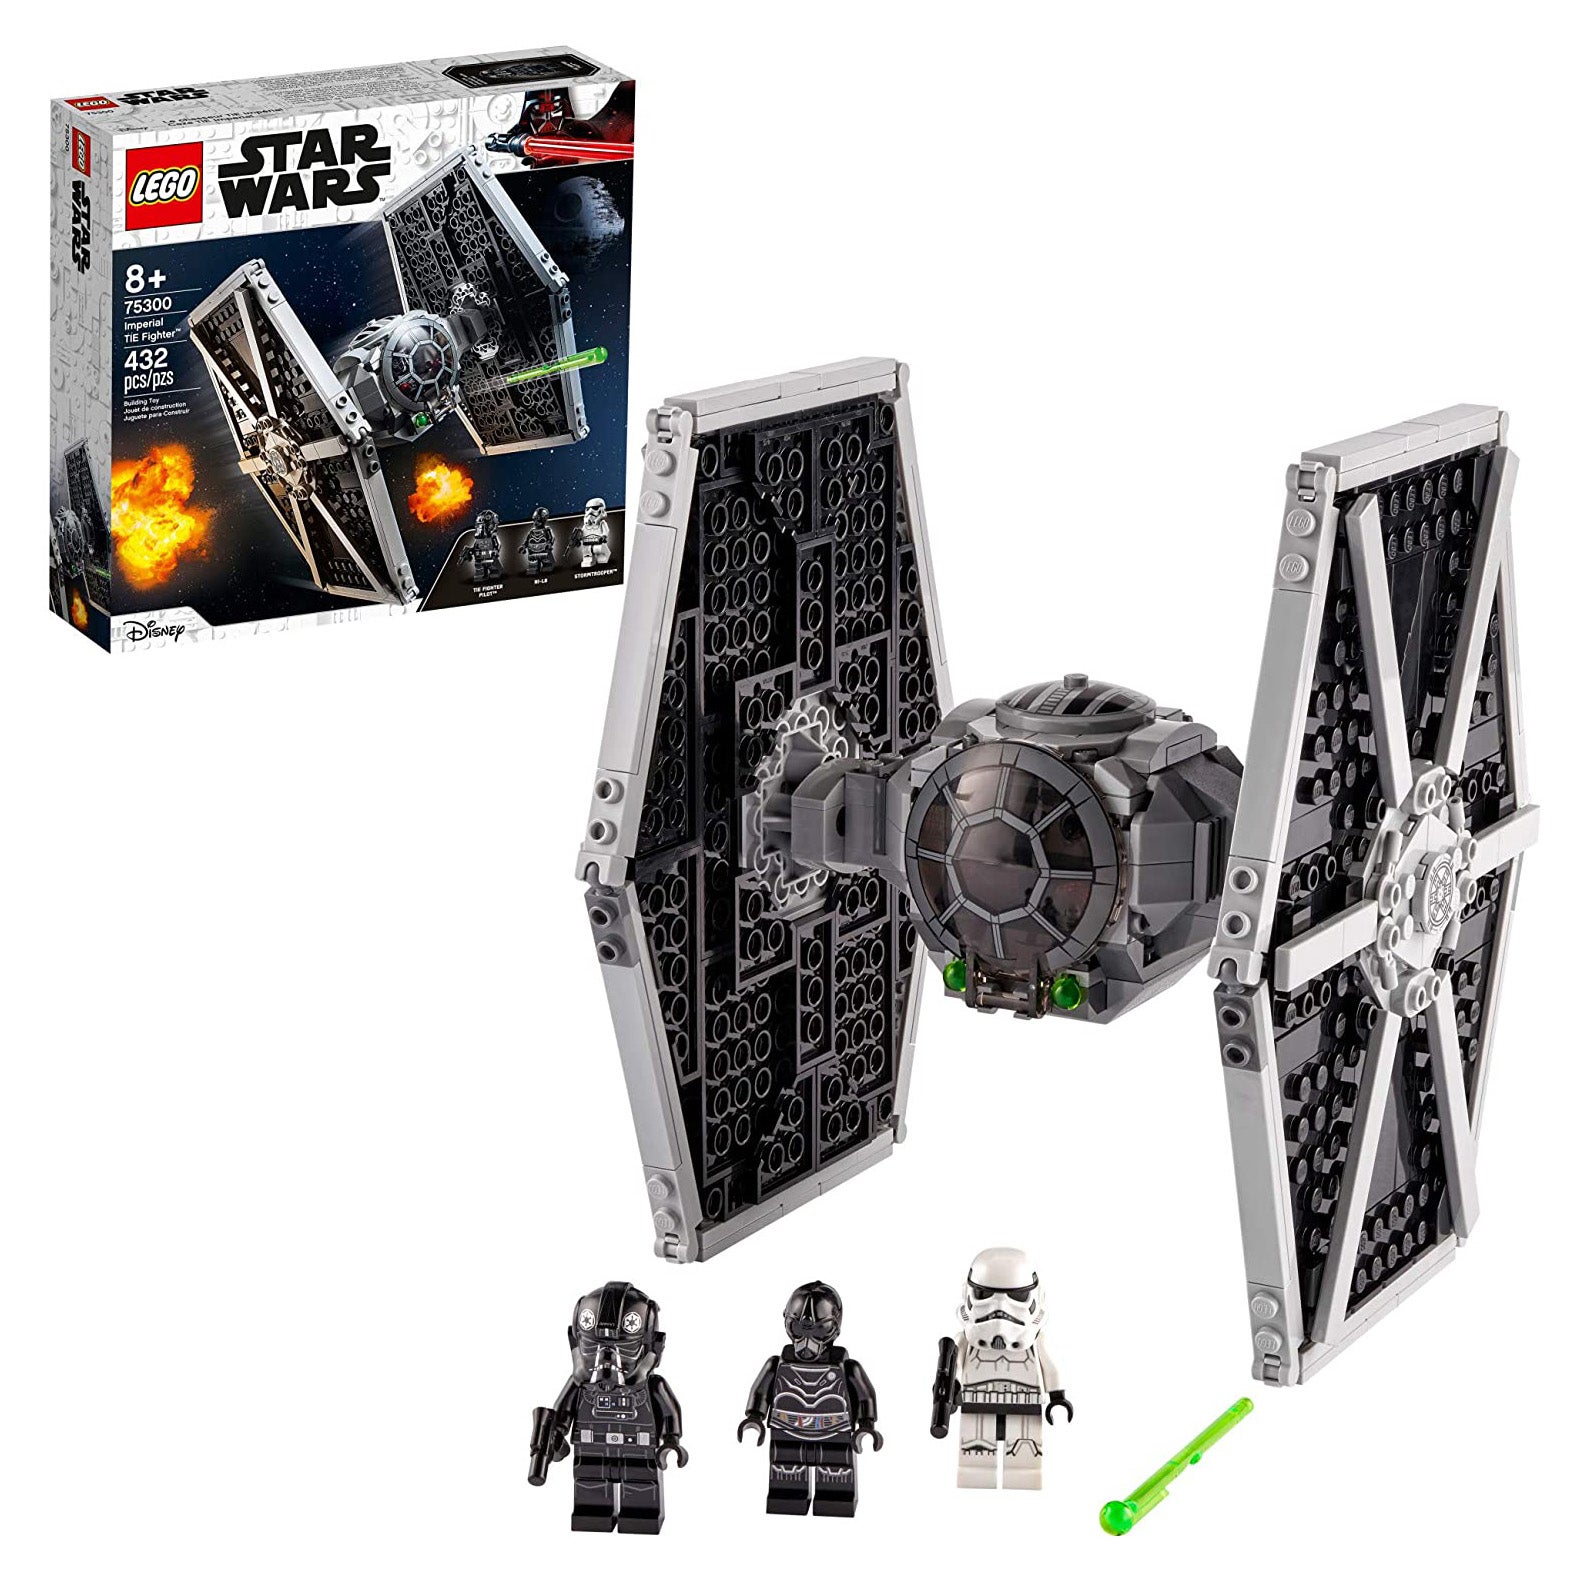 The Best 'Star Wars' Lego Sets on Amazon to Celebrate Star Wars